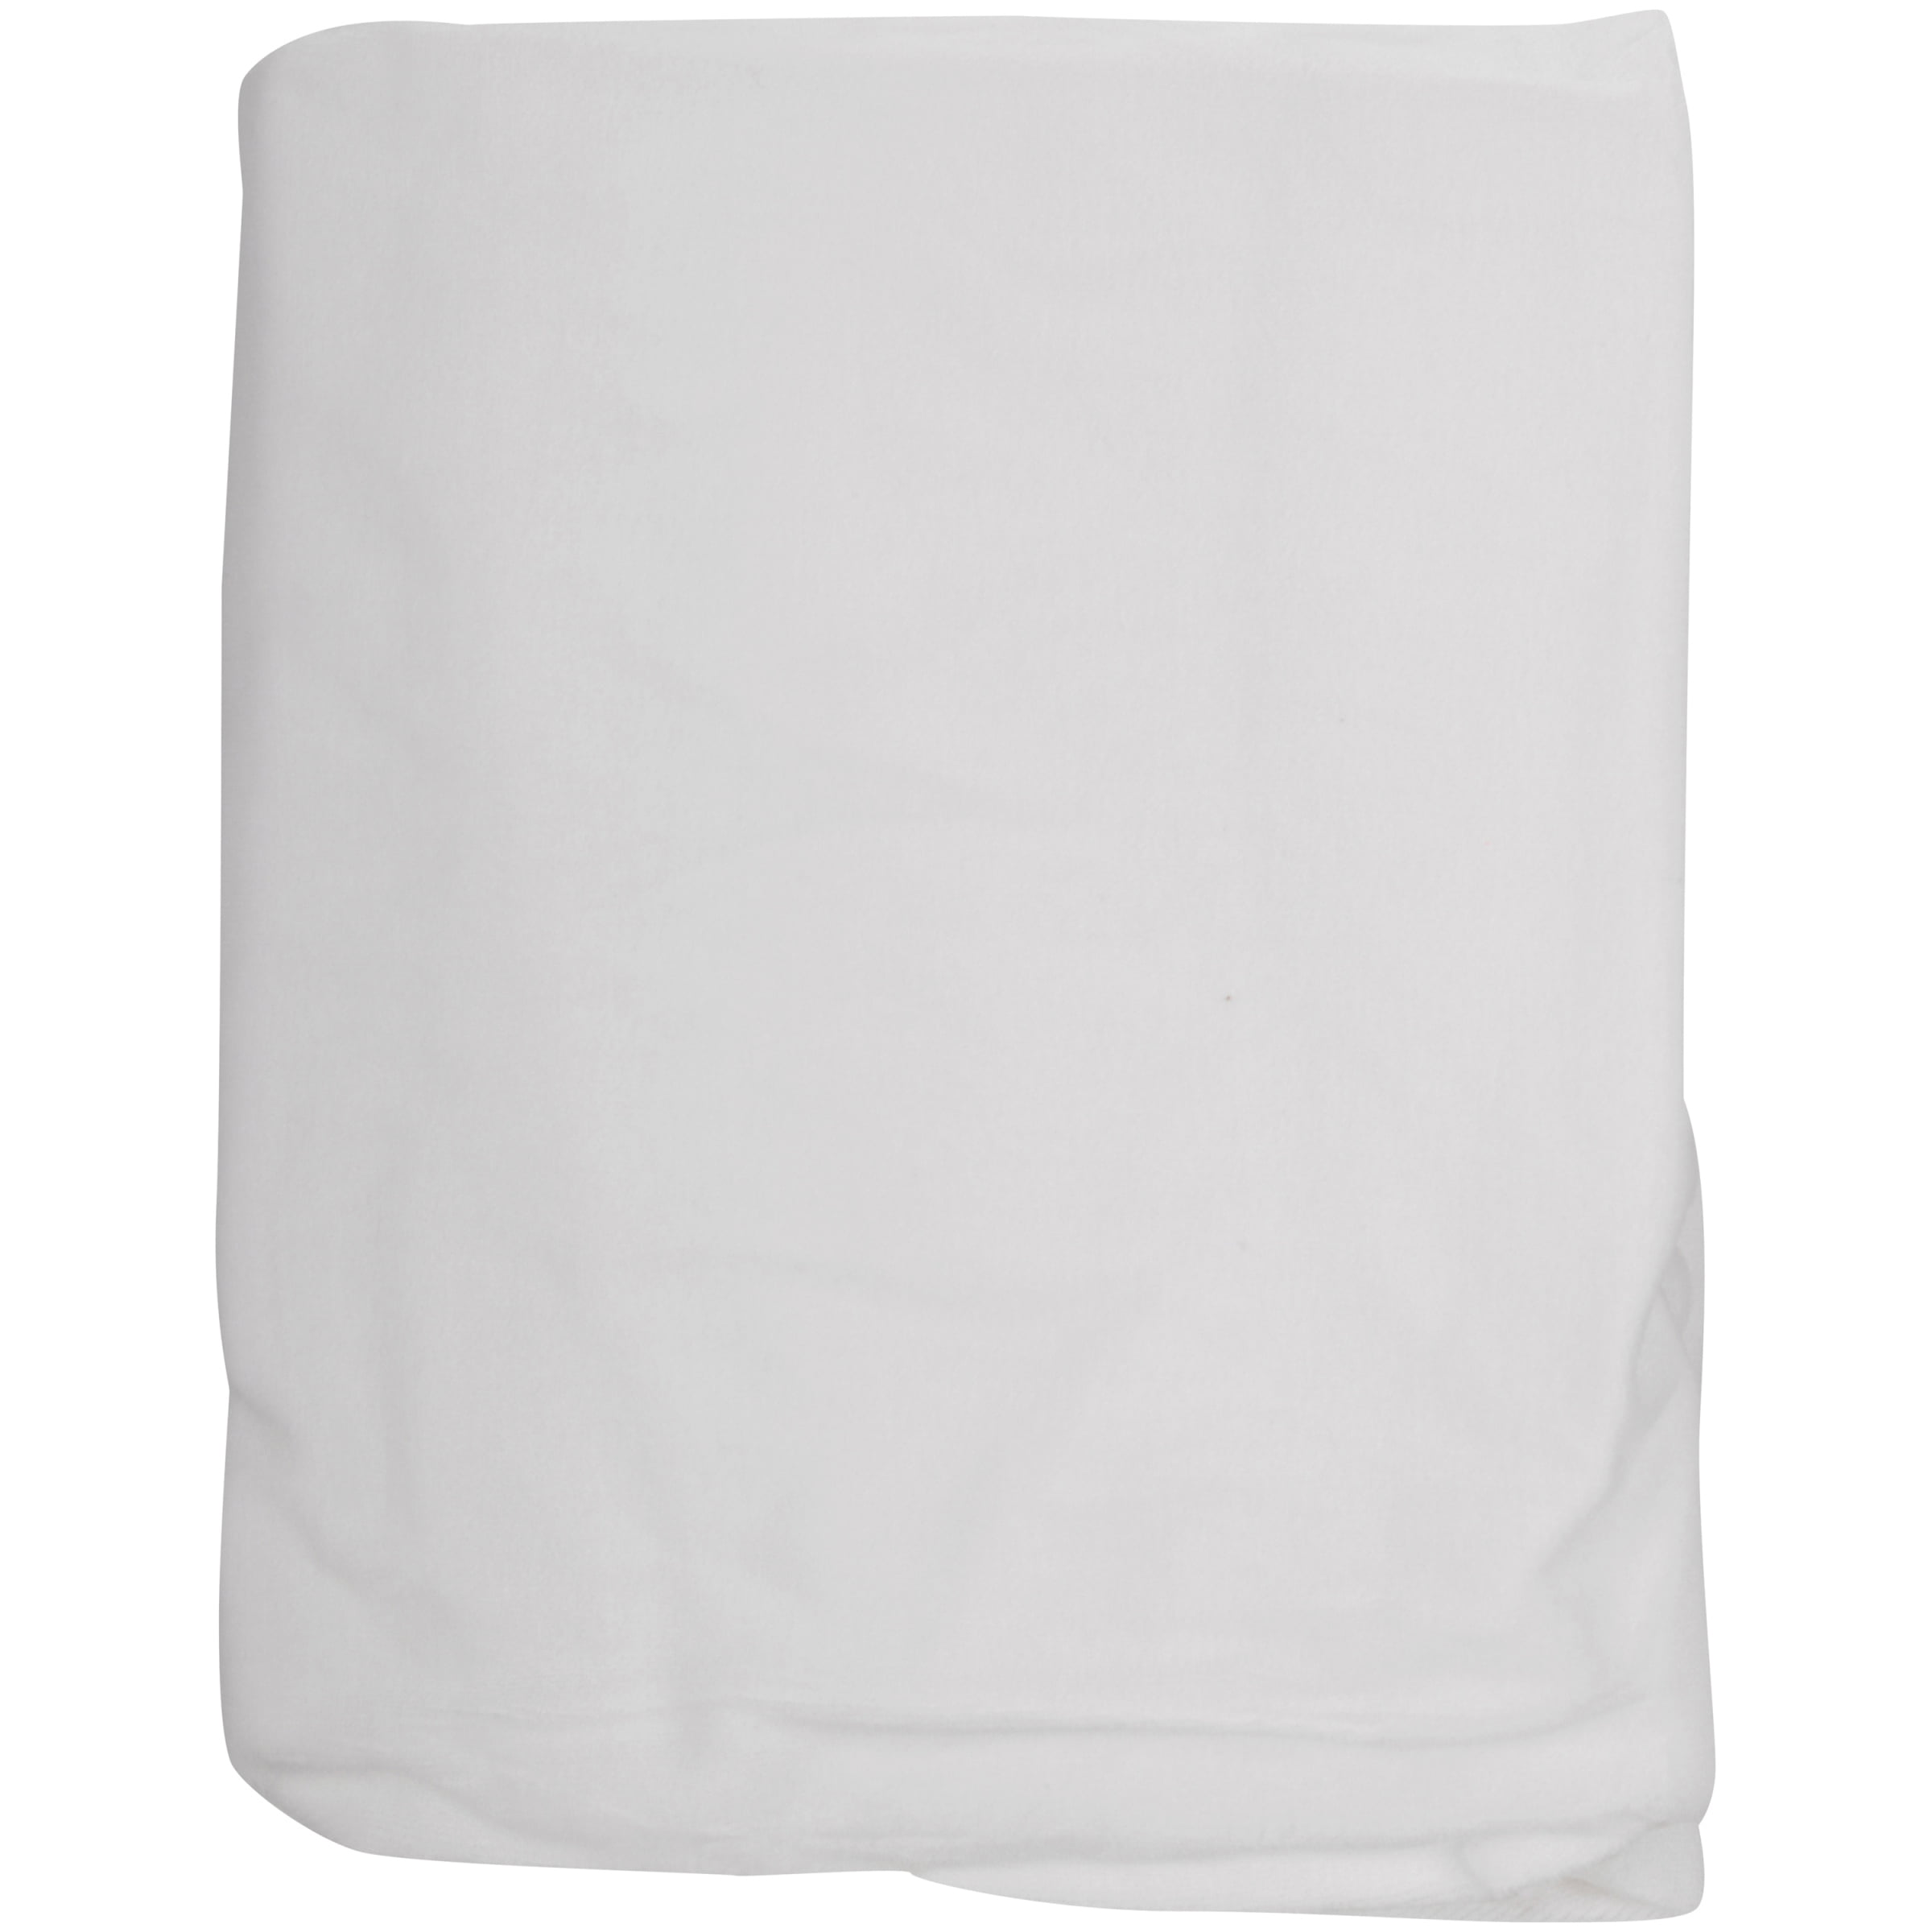 joovy room 2 fitted sheet